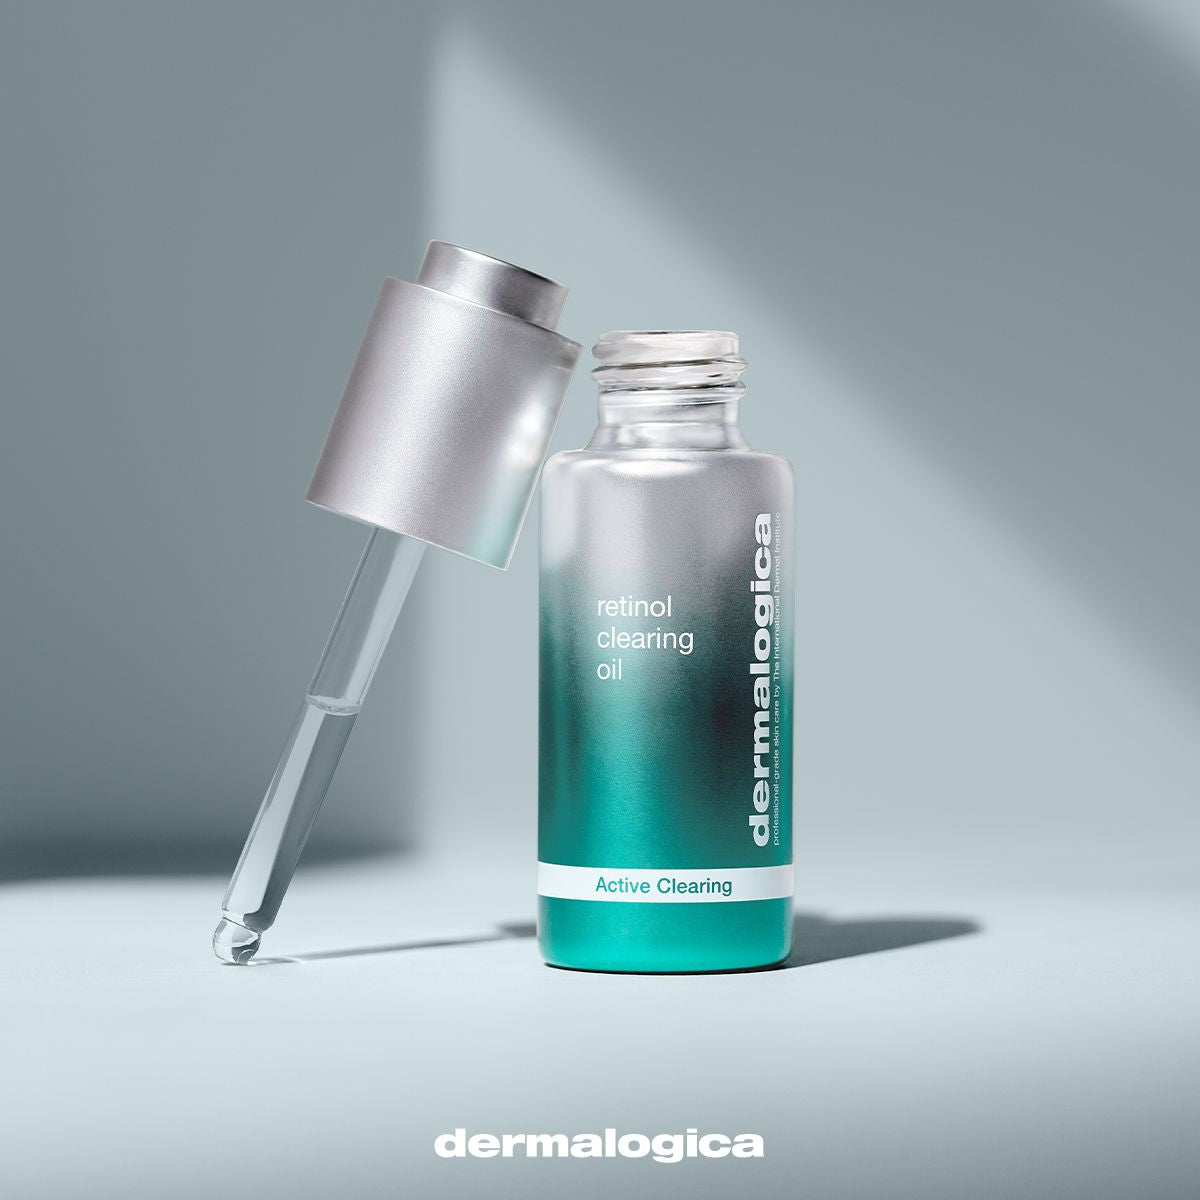 NEW Retinol Clearing Oil by Dermalogica